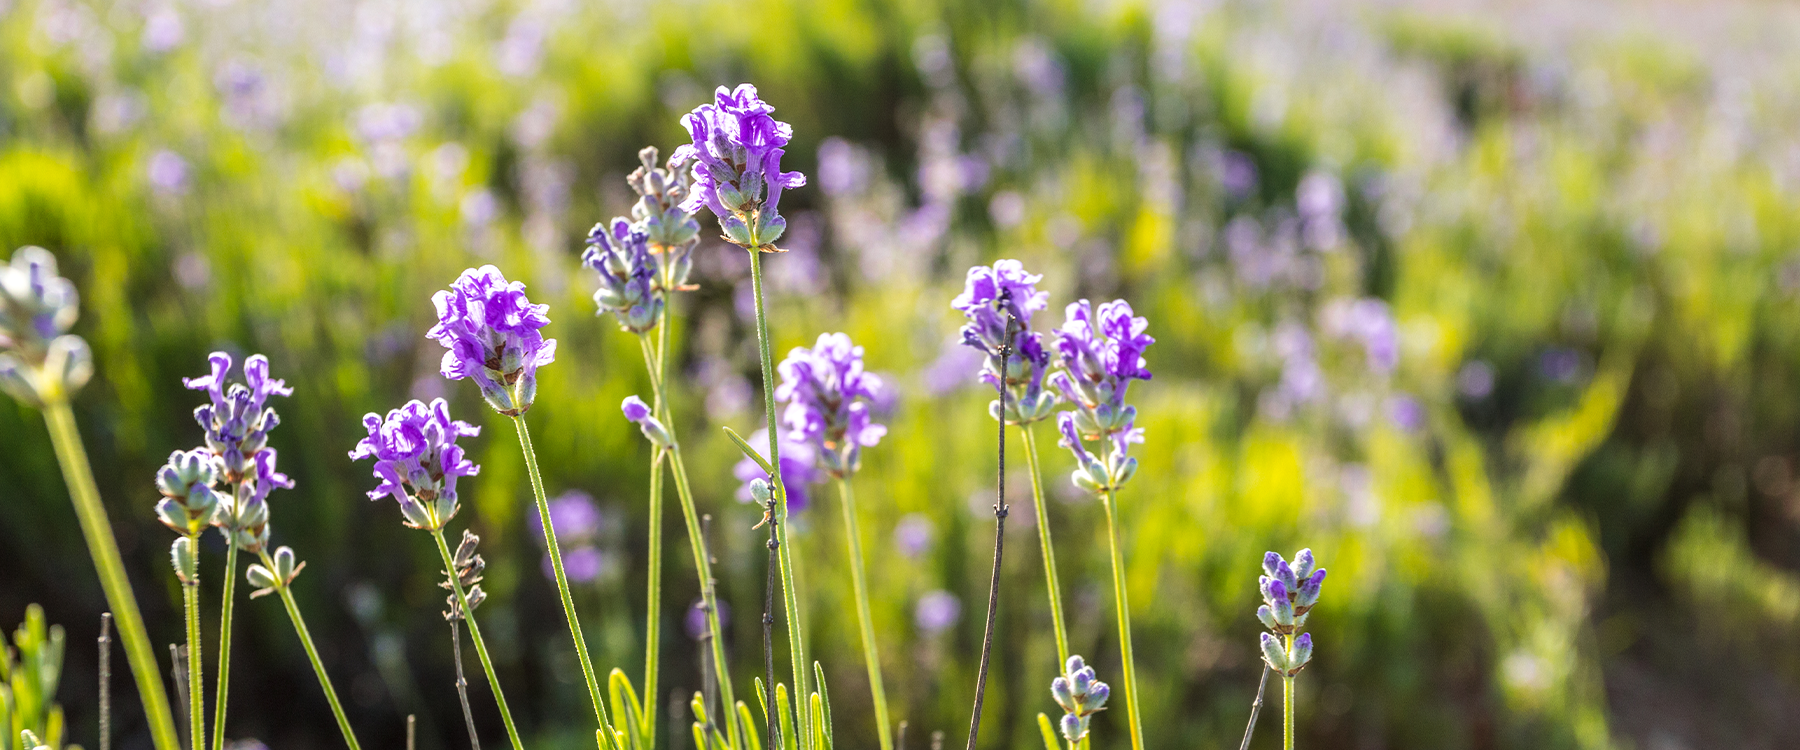 Basic Pruning Tips for Your Lavender Plants